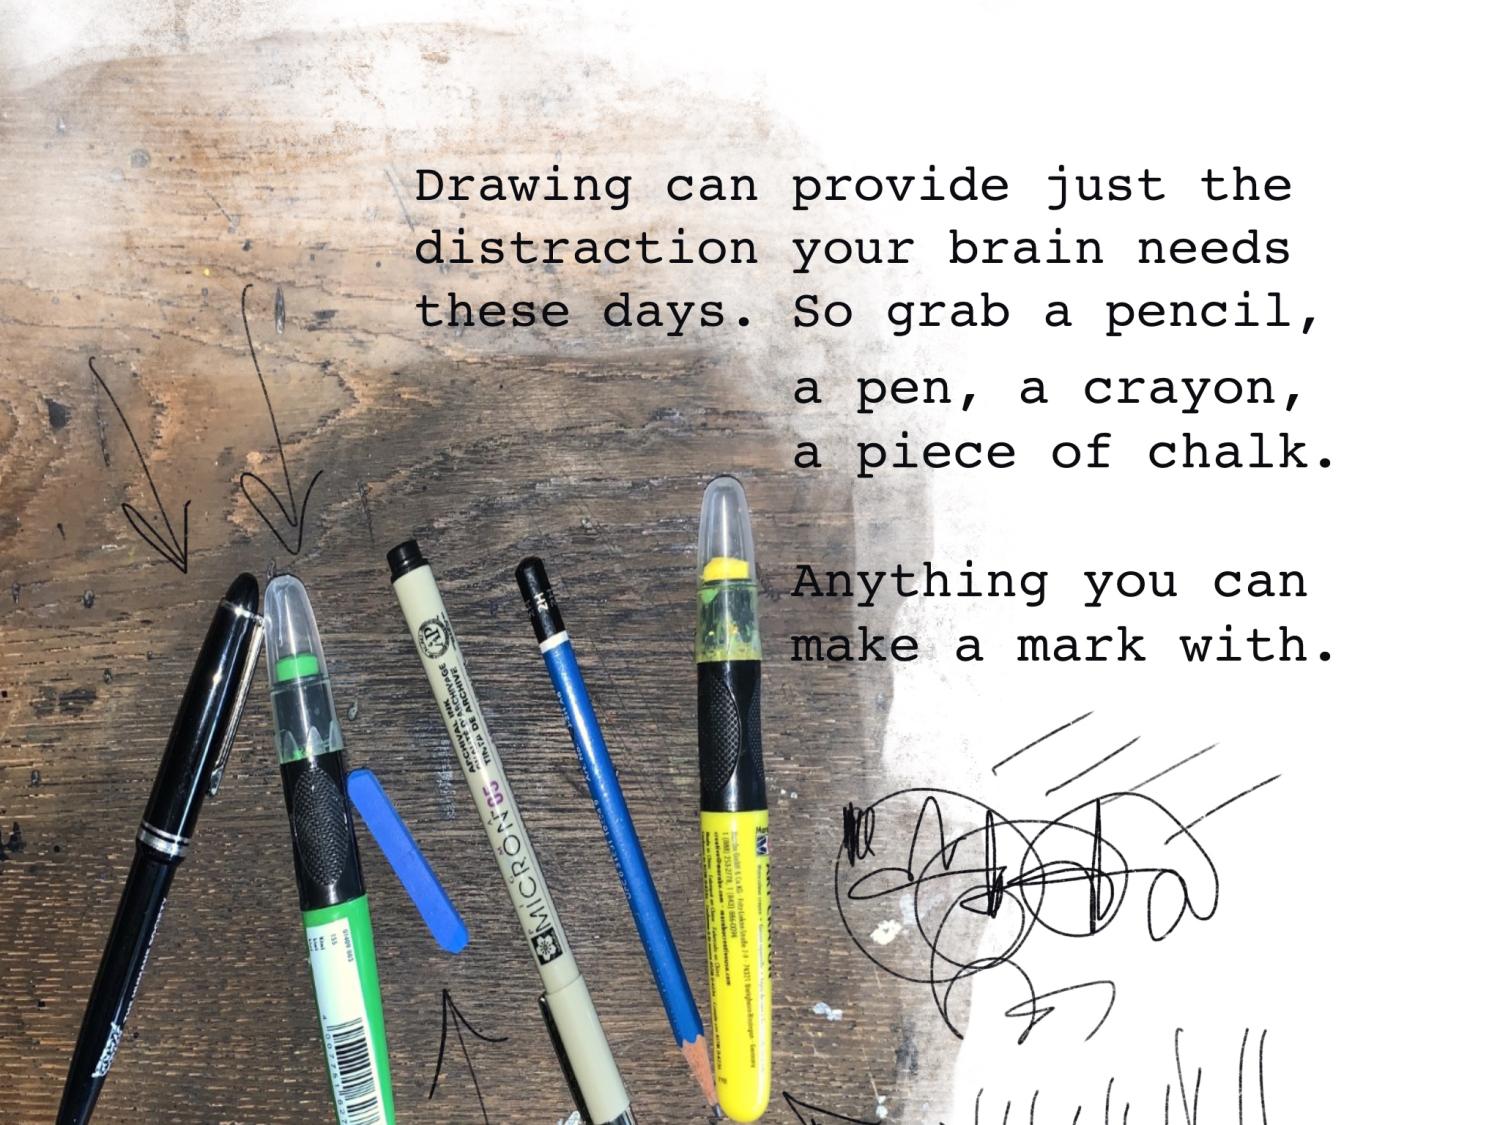 Pens and pencils with sketches